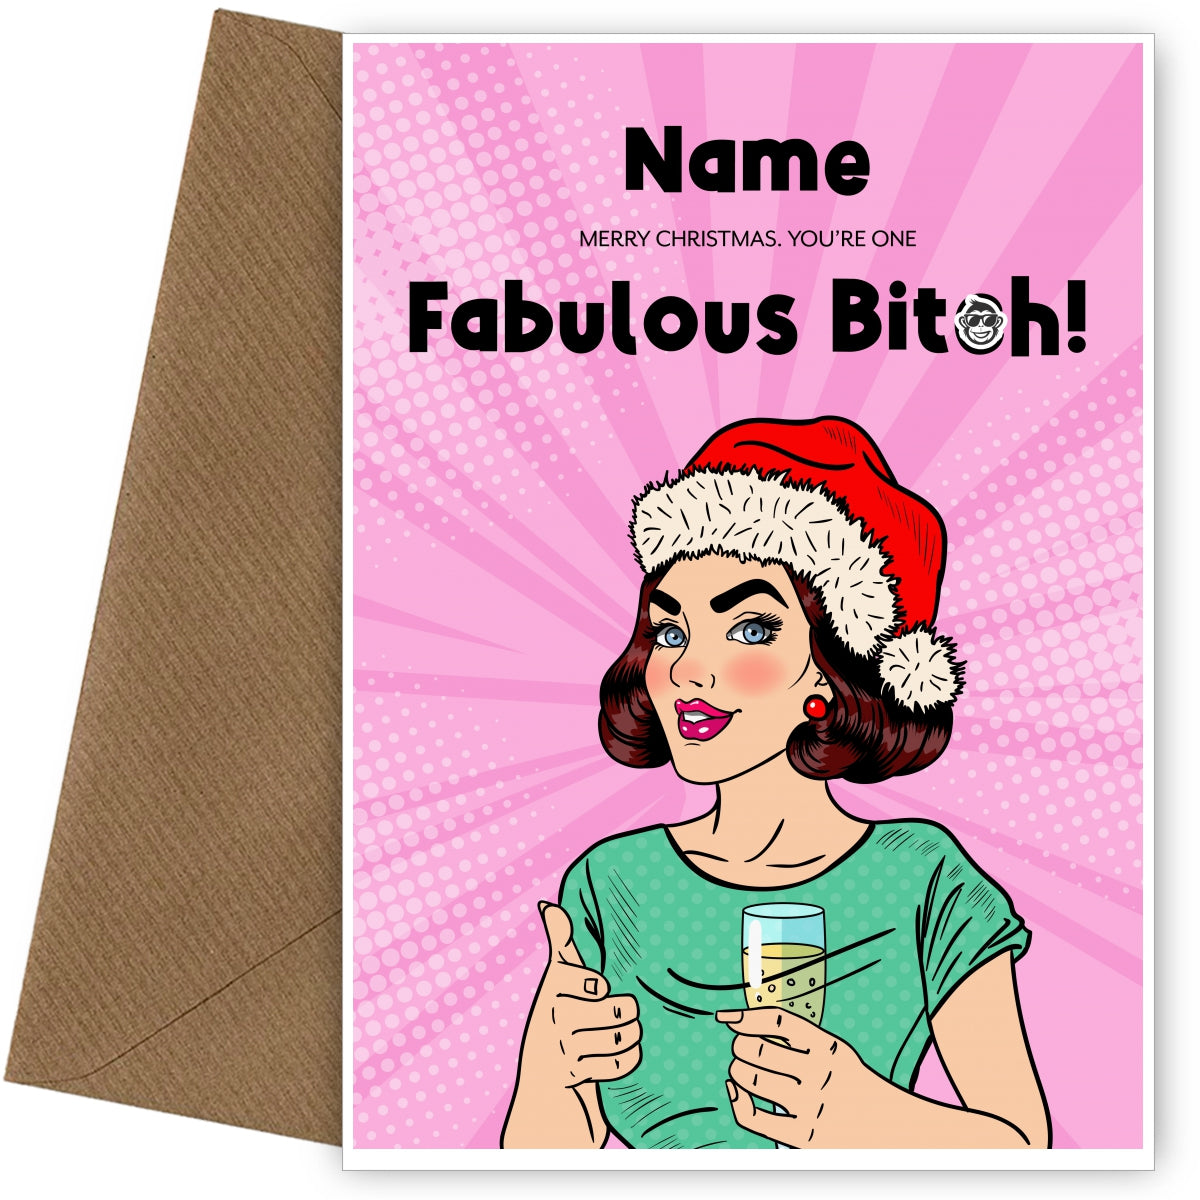 Adult Merry Christmas Card for Her, Wife, Friend - Fabulous B*tch!